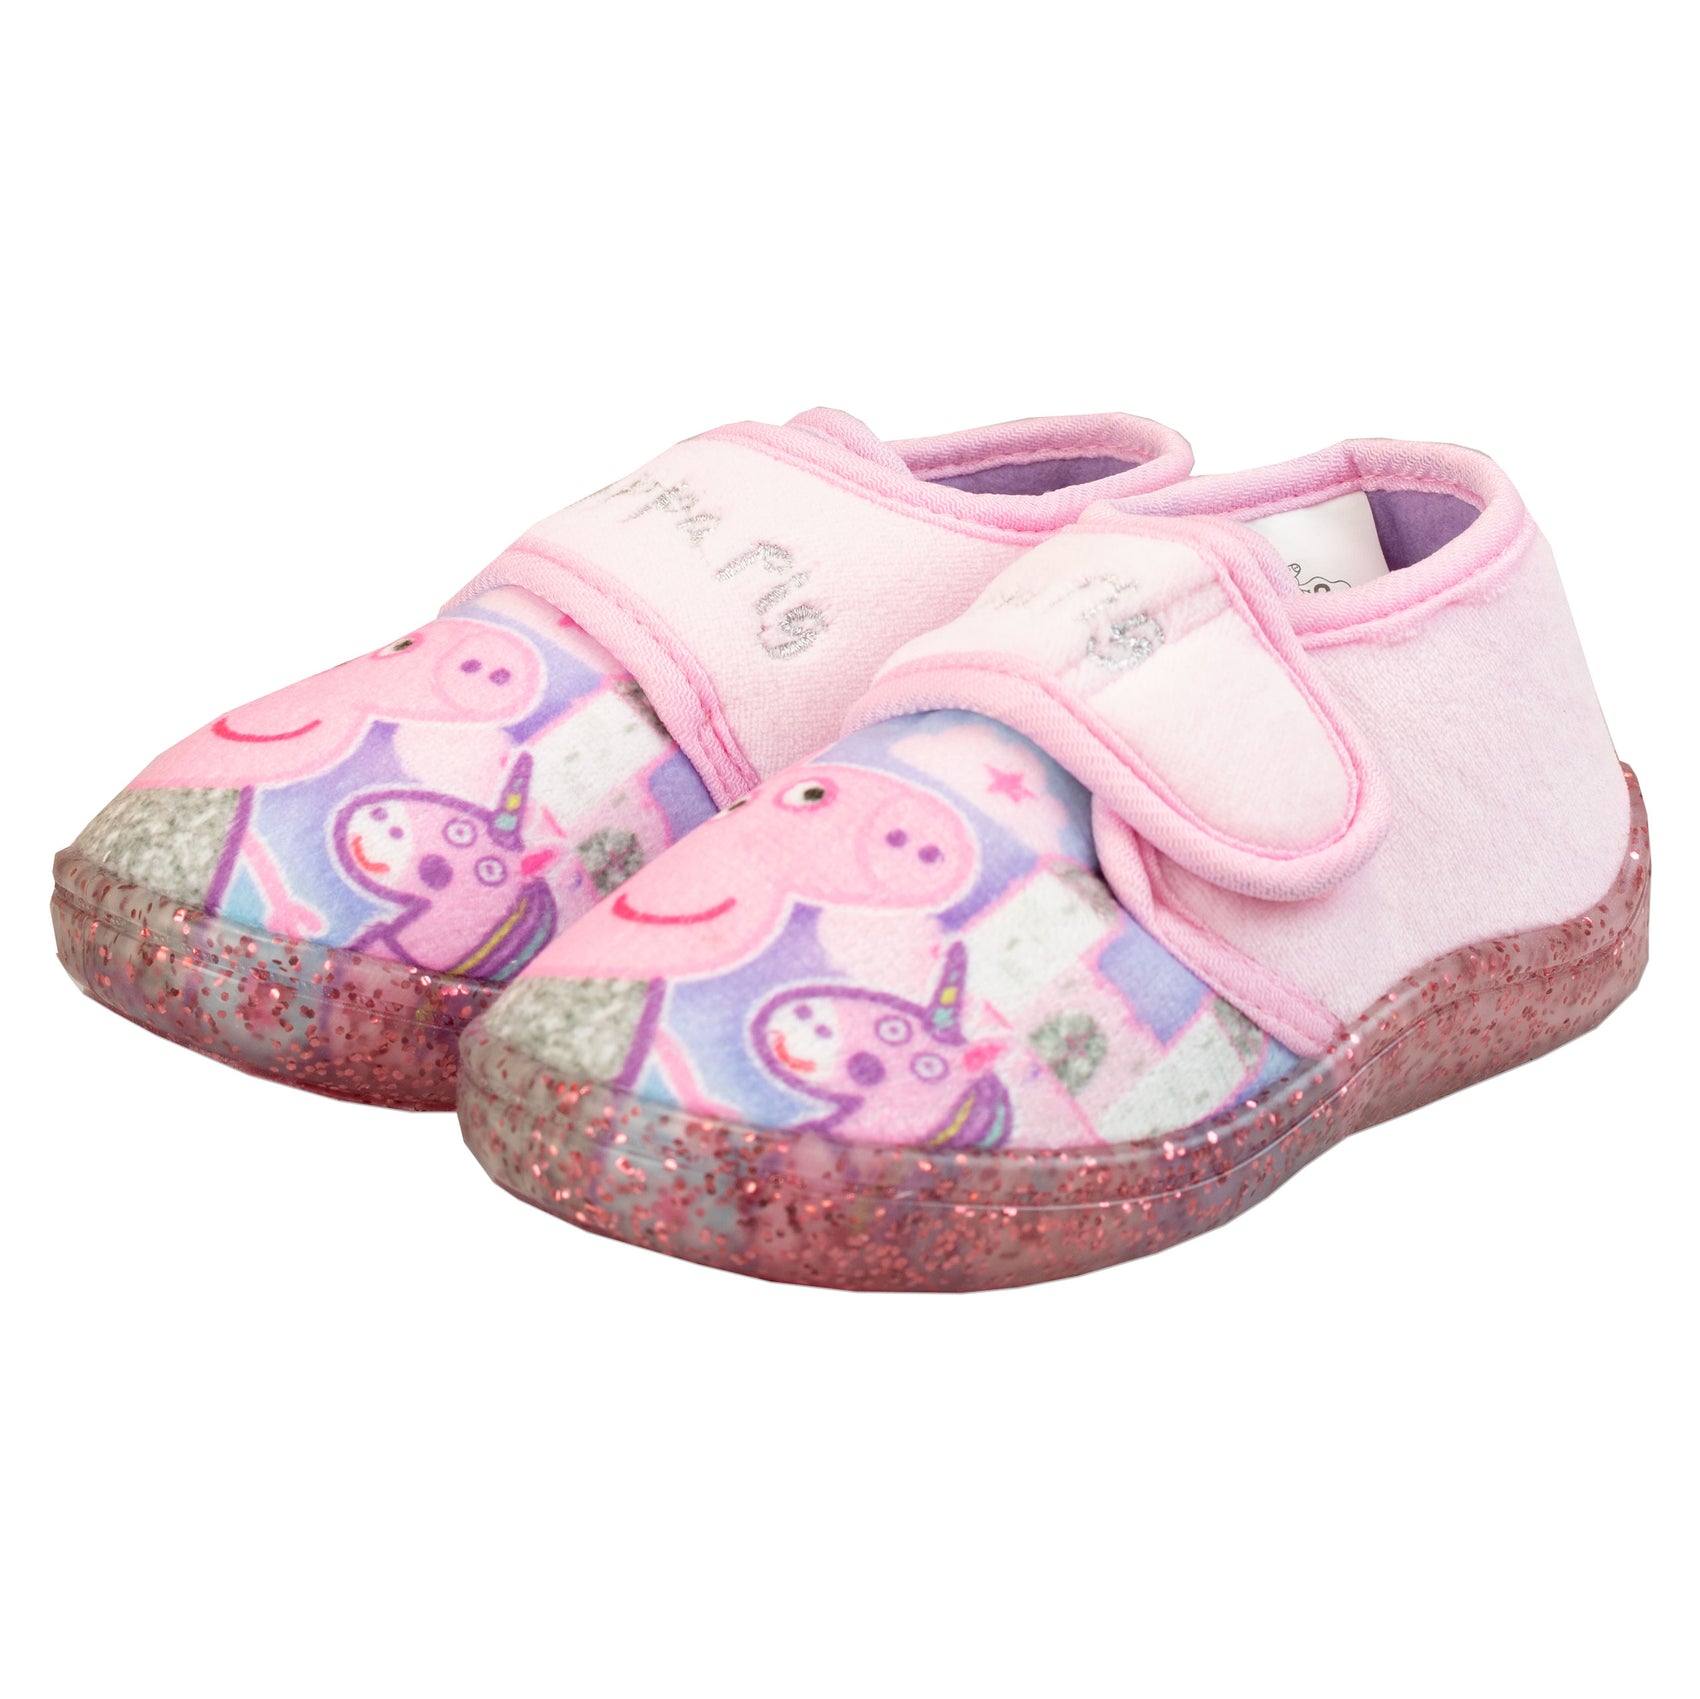 Buy Peppa Pig Slippers | Kids | Character.com Official Merchandise